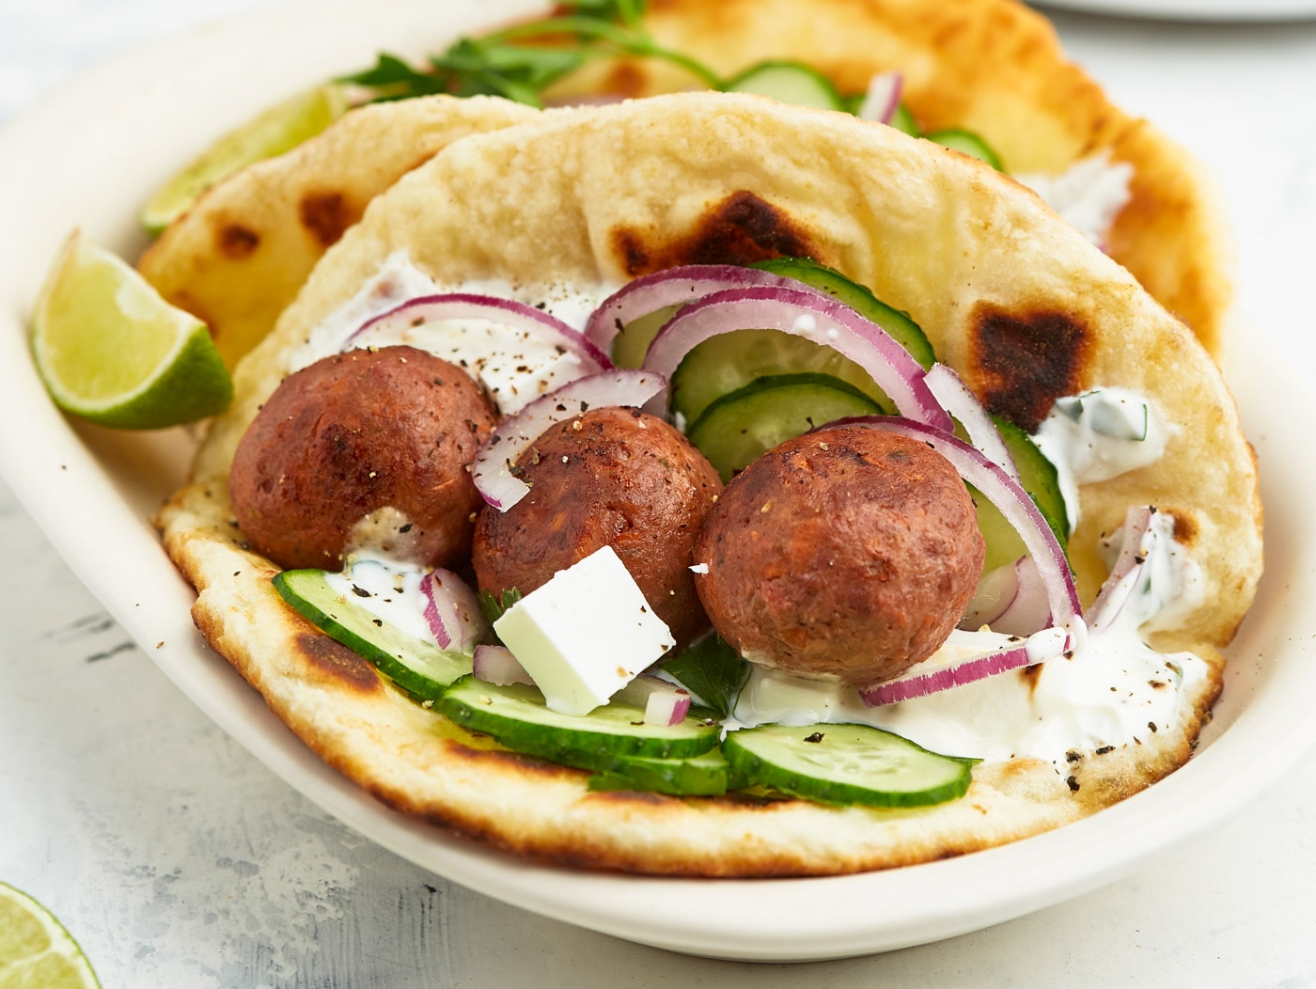 Flatbread with meatballs Eat me at